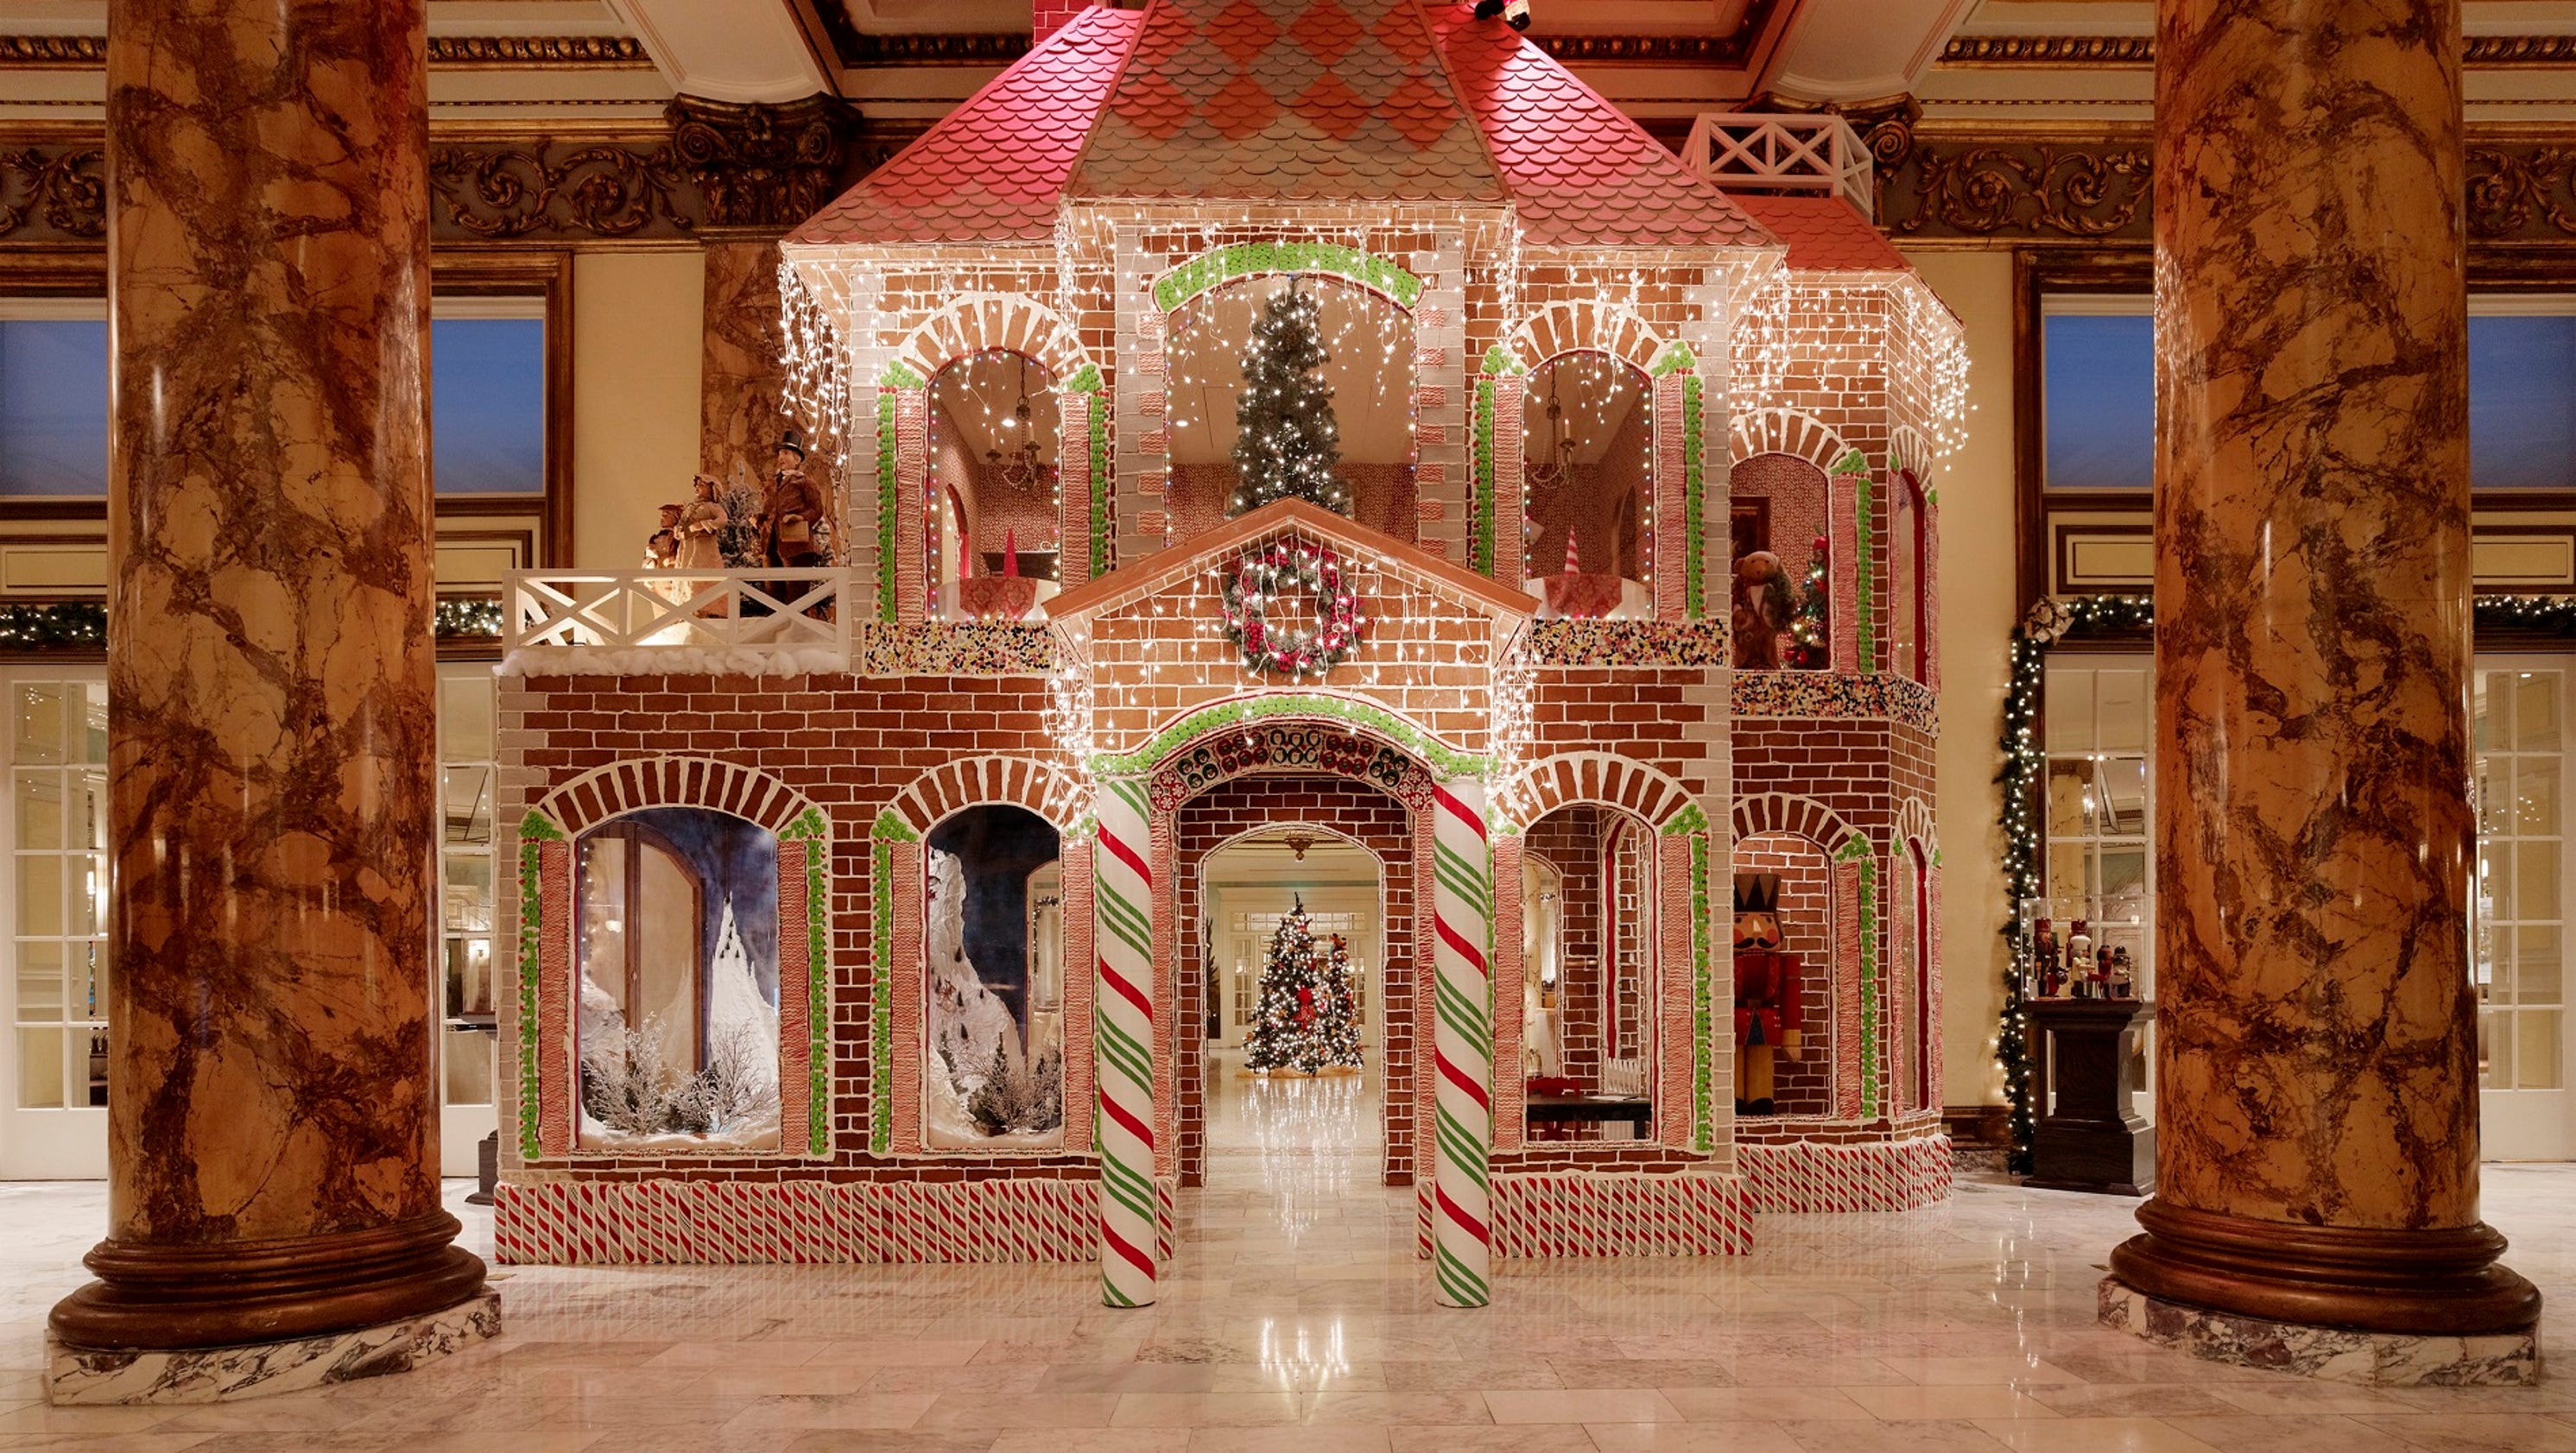 Amazing gingerbread house displays